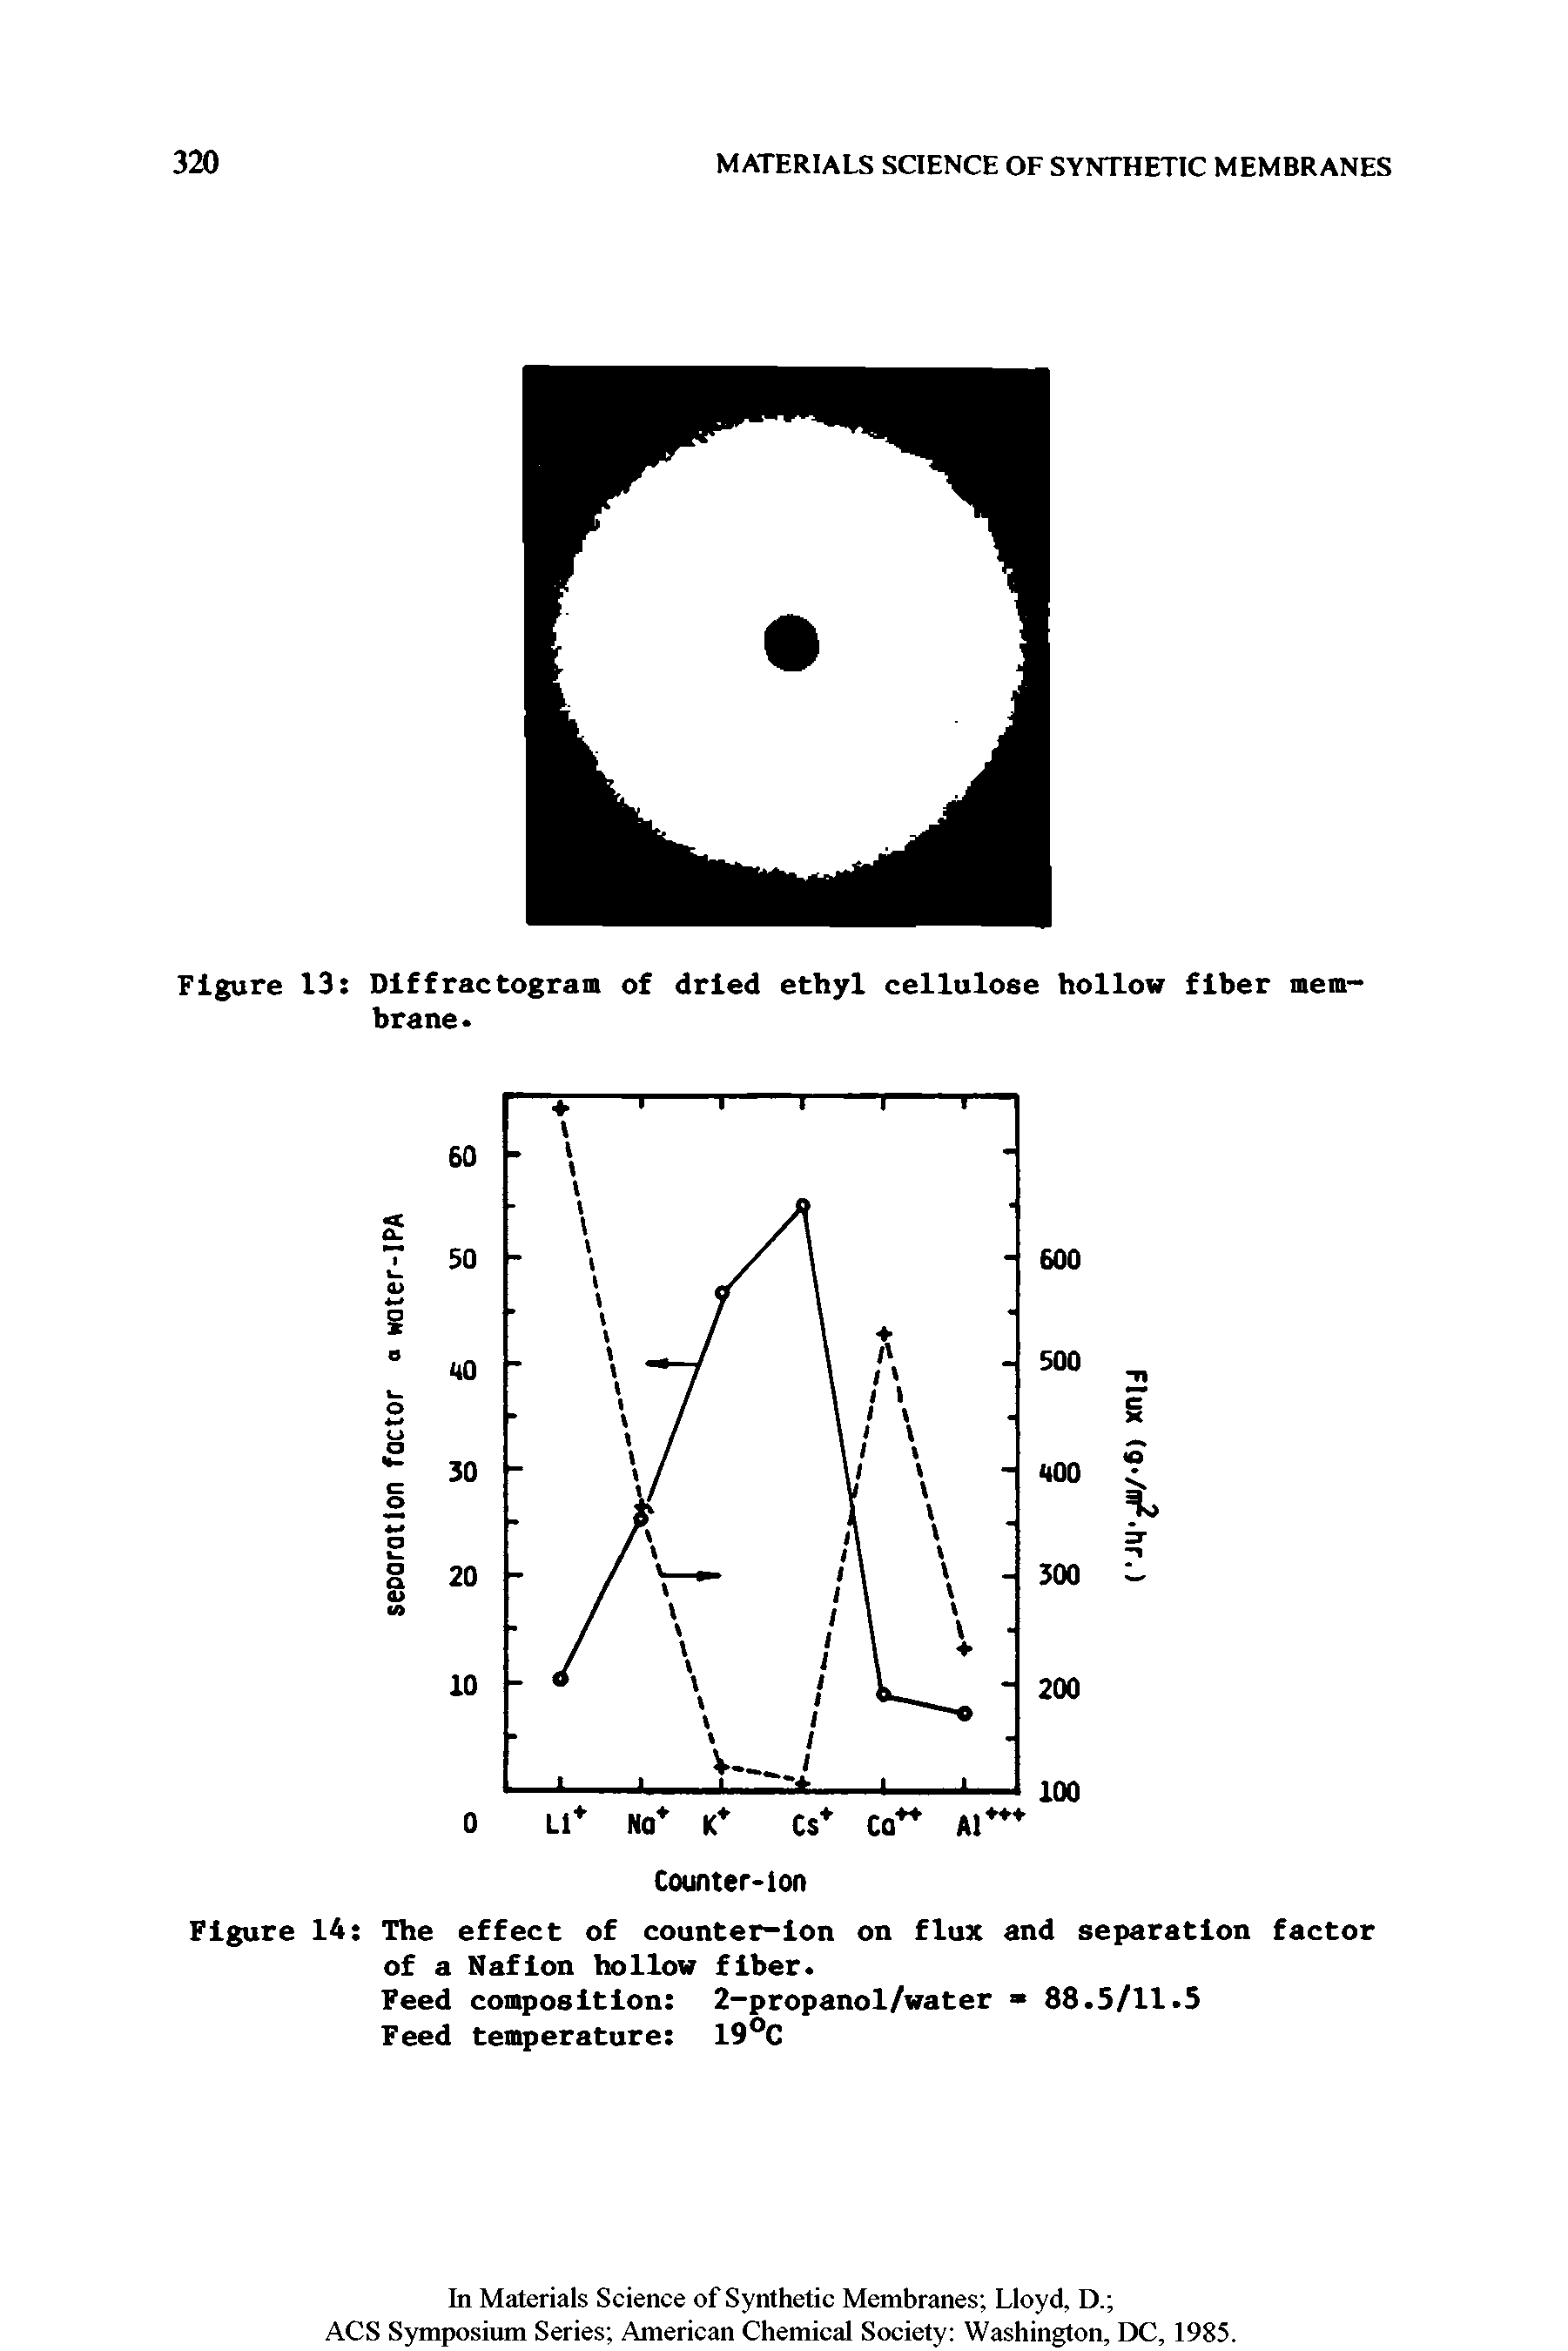 Figure 14 The effect of counter-Ion on flux and separation factor of a Naflon hollow fiber.